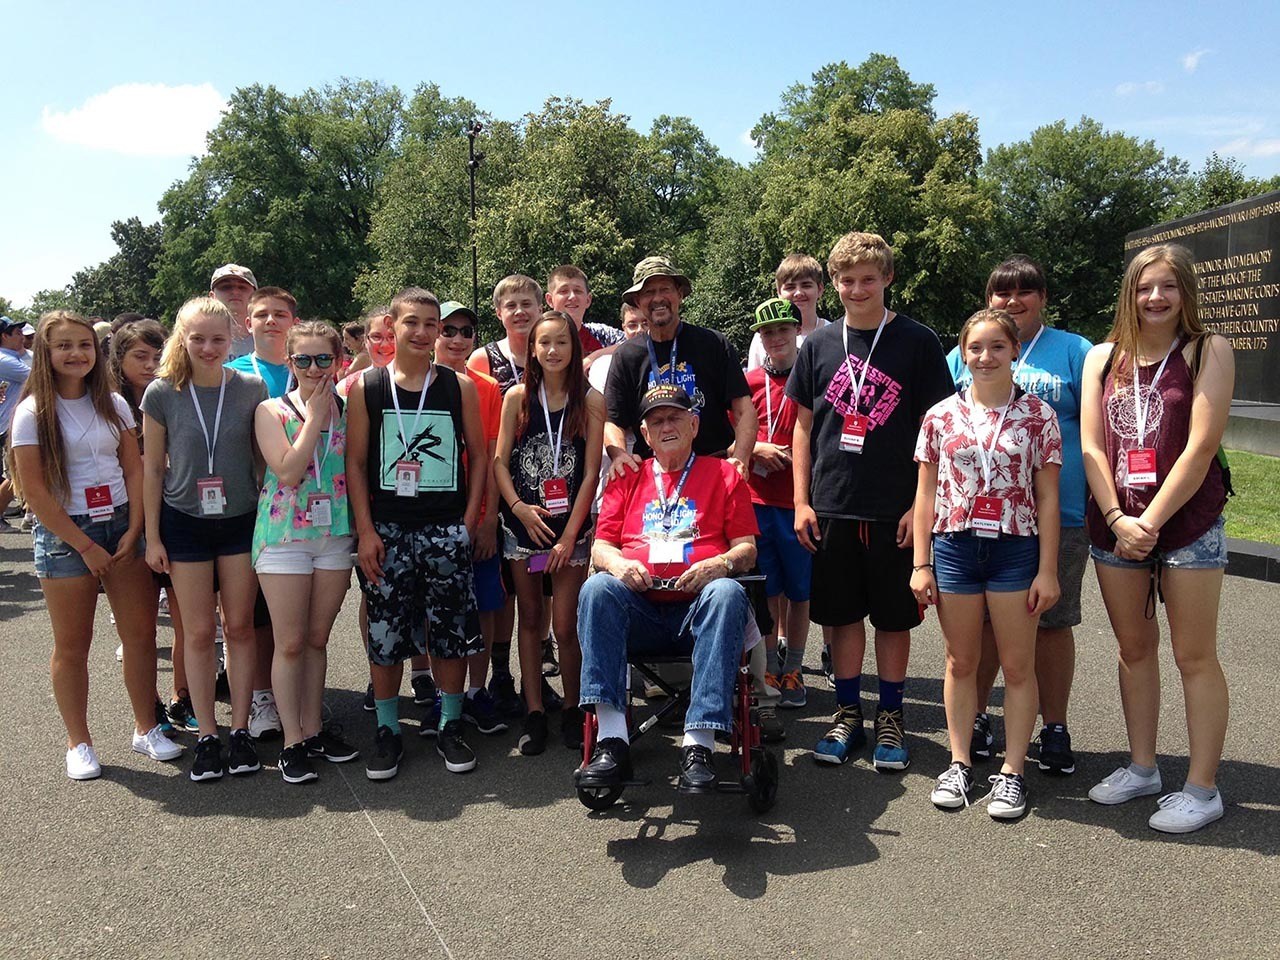 Laura Carle/Contributed Photo Miller Junior High School students pose with U.S. military veterans during their trip in June to various sites in Washington, D.C. and New York City. Students and families are beginning to plan and raise funds for the trip planned in June 2018.